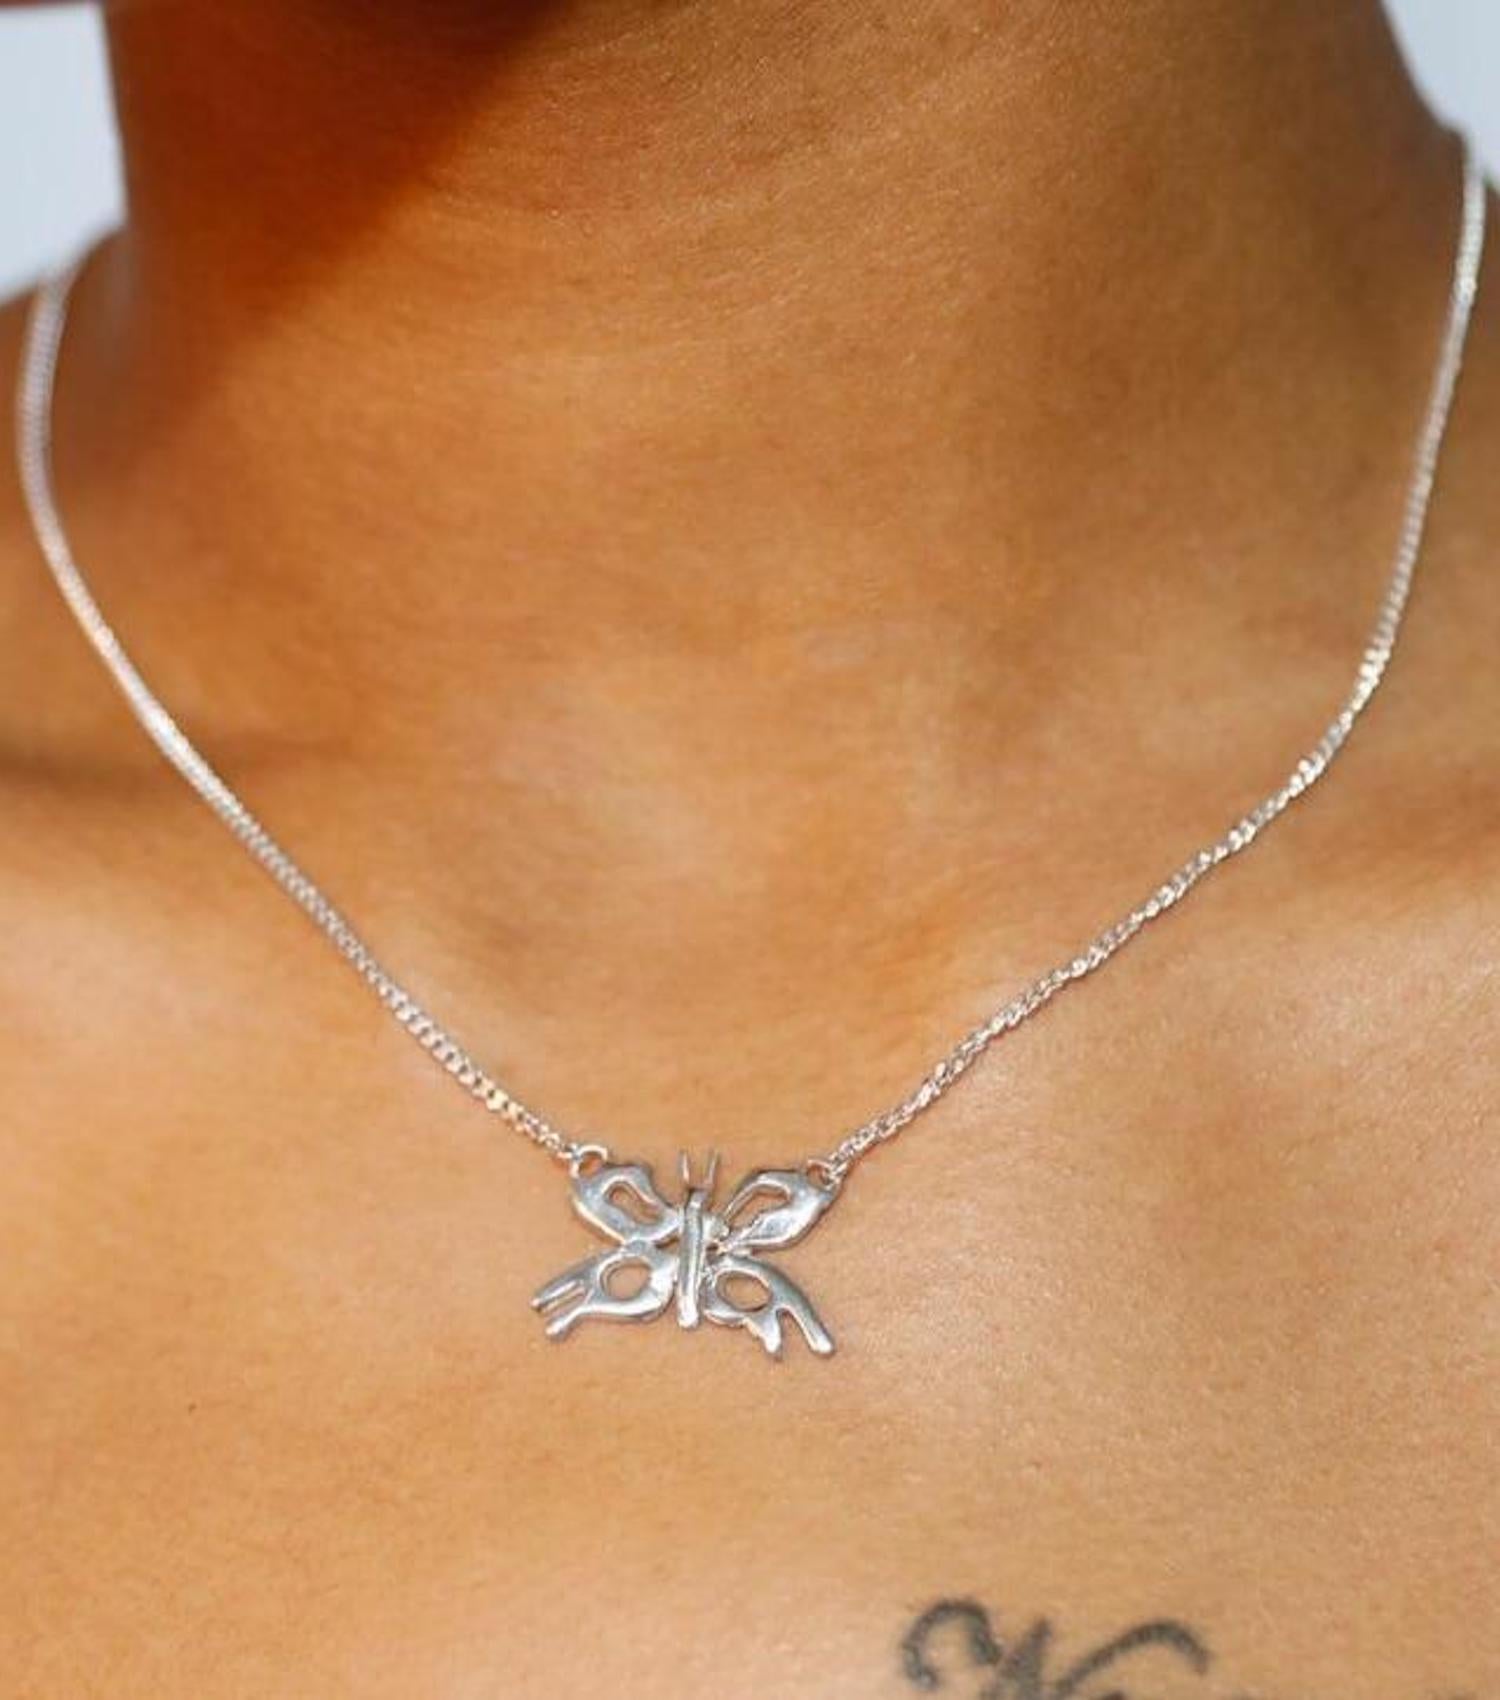 mgn jwl, Megan Baker, Jewelry, Australia, Sterling Silver, Urchin Heart, Gemstones, Kathleen, Shop Kathleen, Los Angeles, Kathleen, Boutique, Bow & Arrow Necklace, Cupid Necklace, Defence Necklace, mariposa necklace, butterfly necklace, silver butterfly, butterfly jewelry